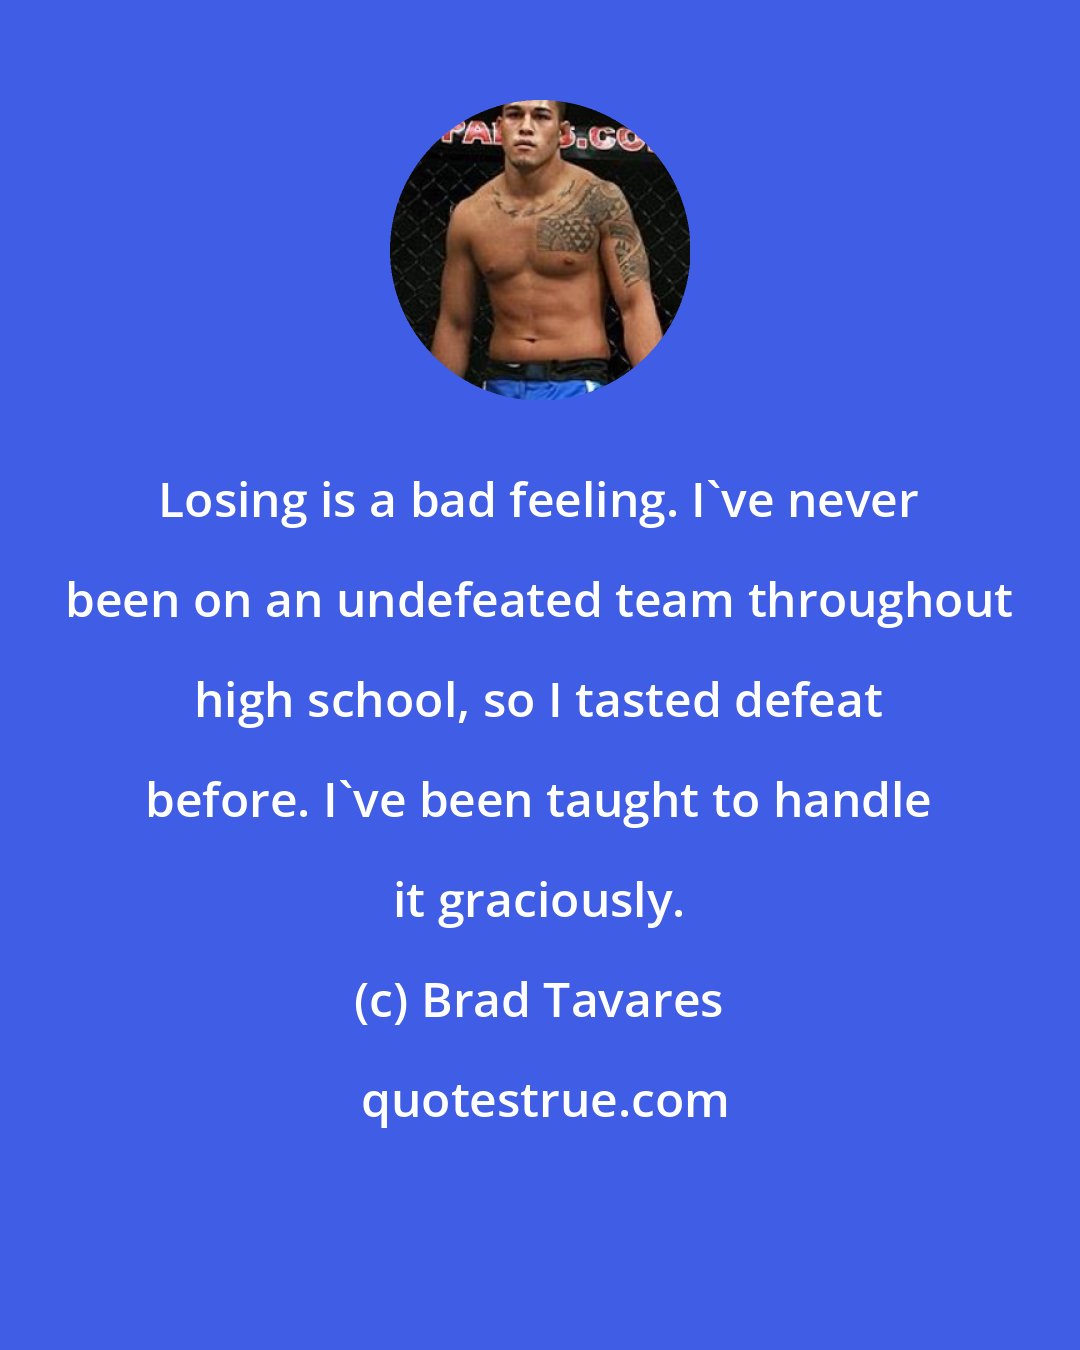 Brad Tavares: Losing is a bad feeling. I've never been on an undefeated team throughout high school, so I tasted defeat before. I've been taught to handle it graciously.